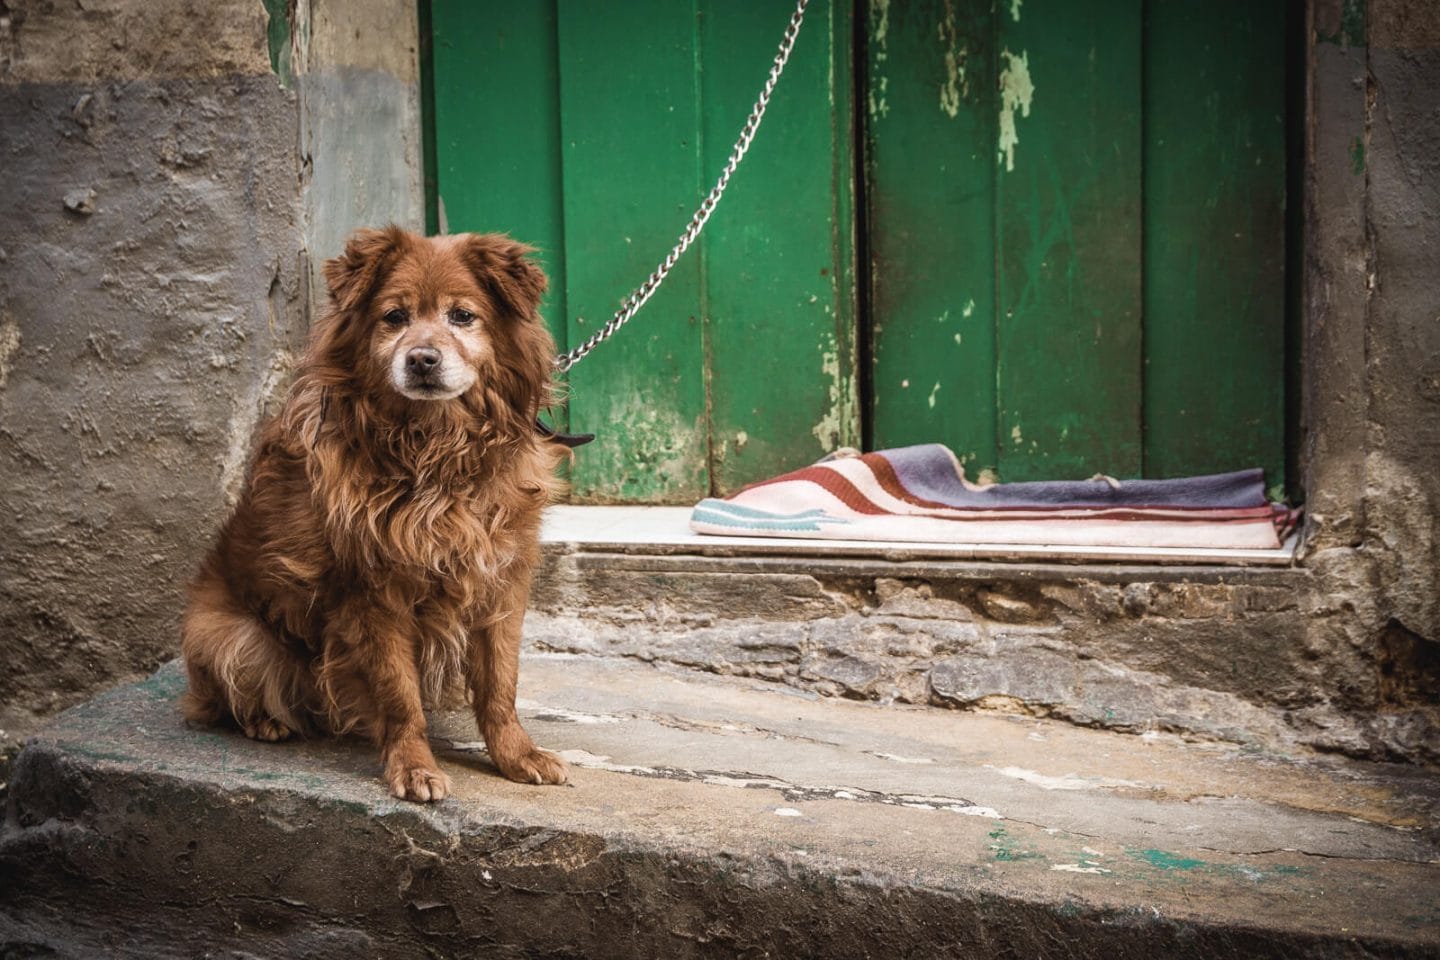 Is It Illegal to Leave Your Dog Chained Outside in Montana? Here’s What the Law Says